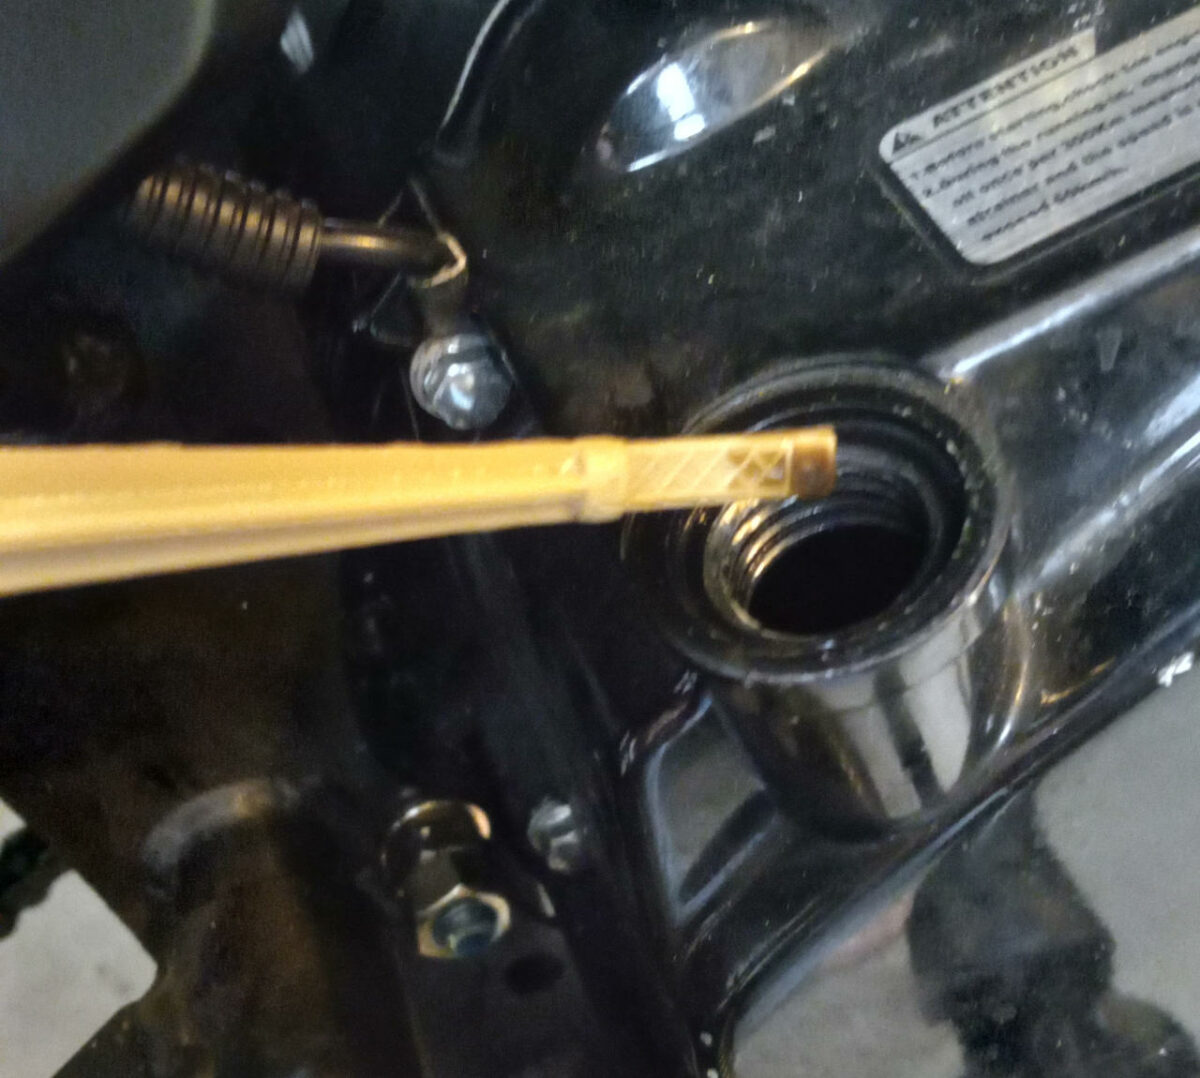 Actually How To Check Motorcycle Oil Level On The Boom Vader with the dipstick.